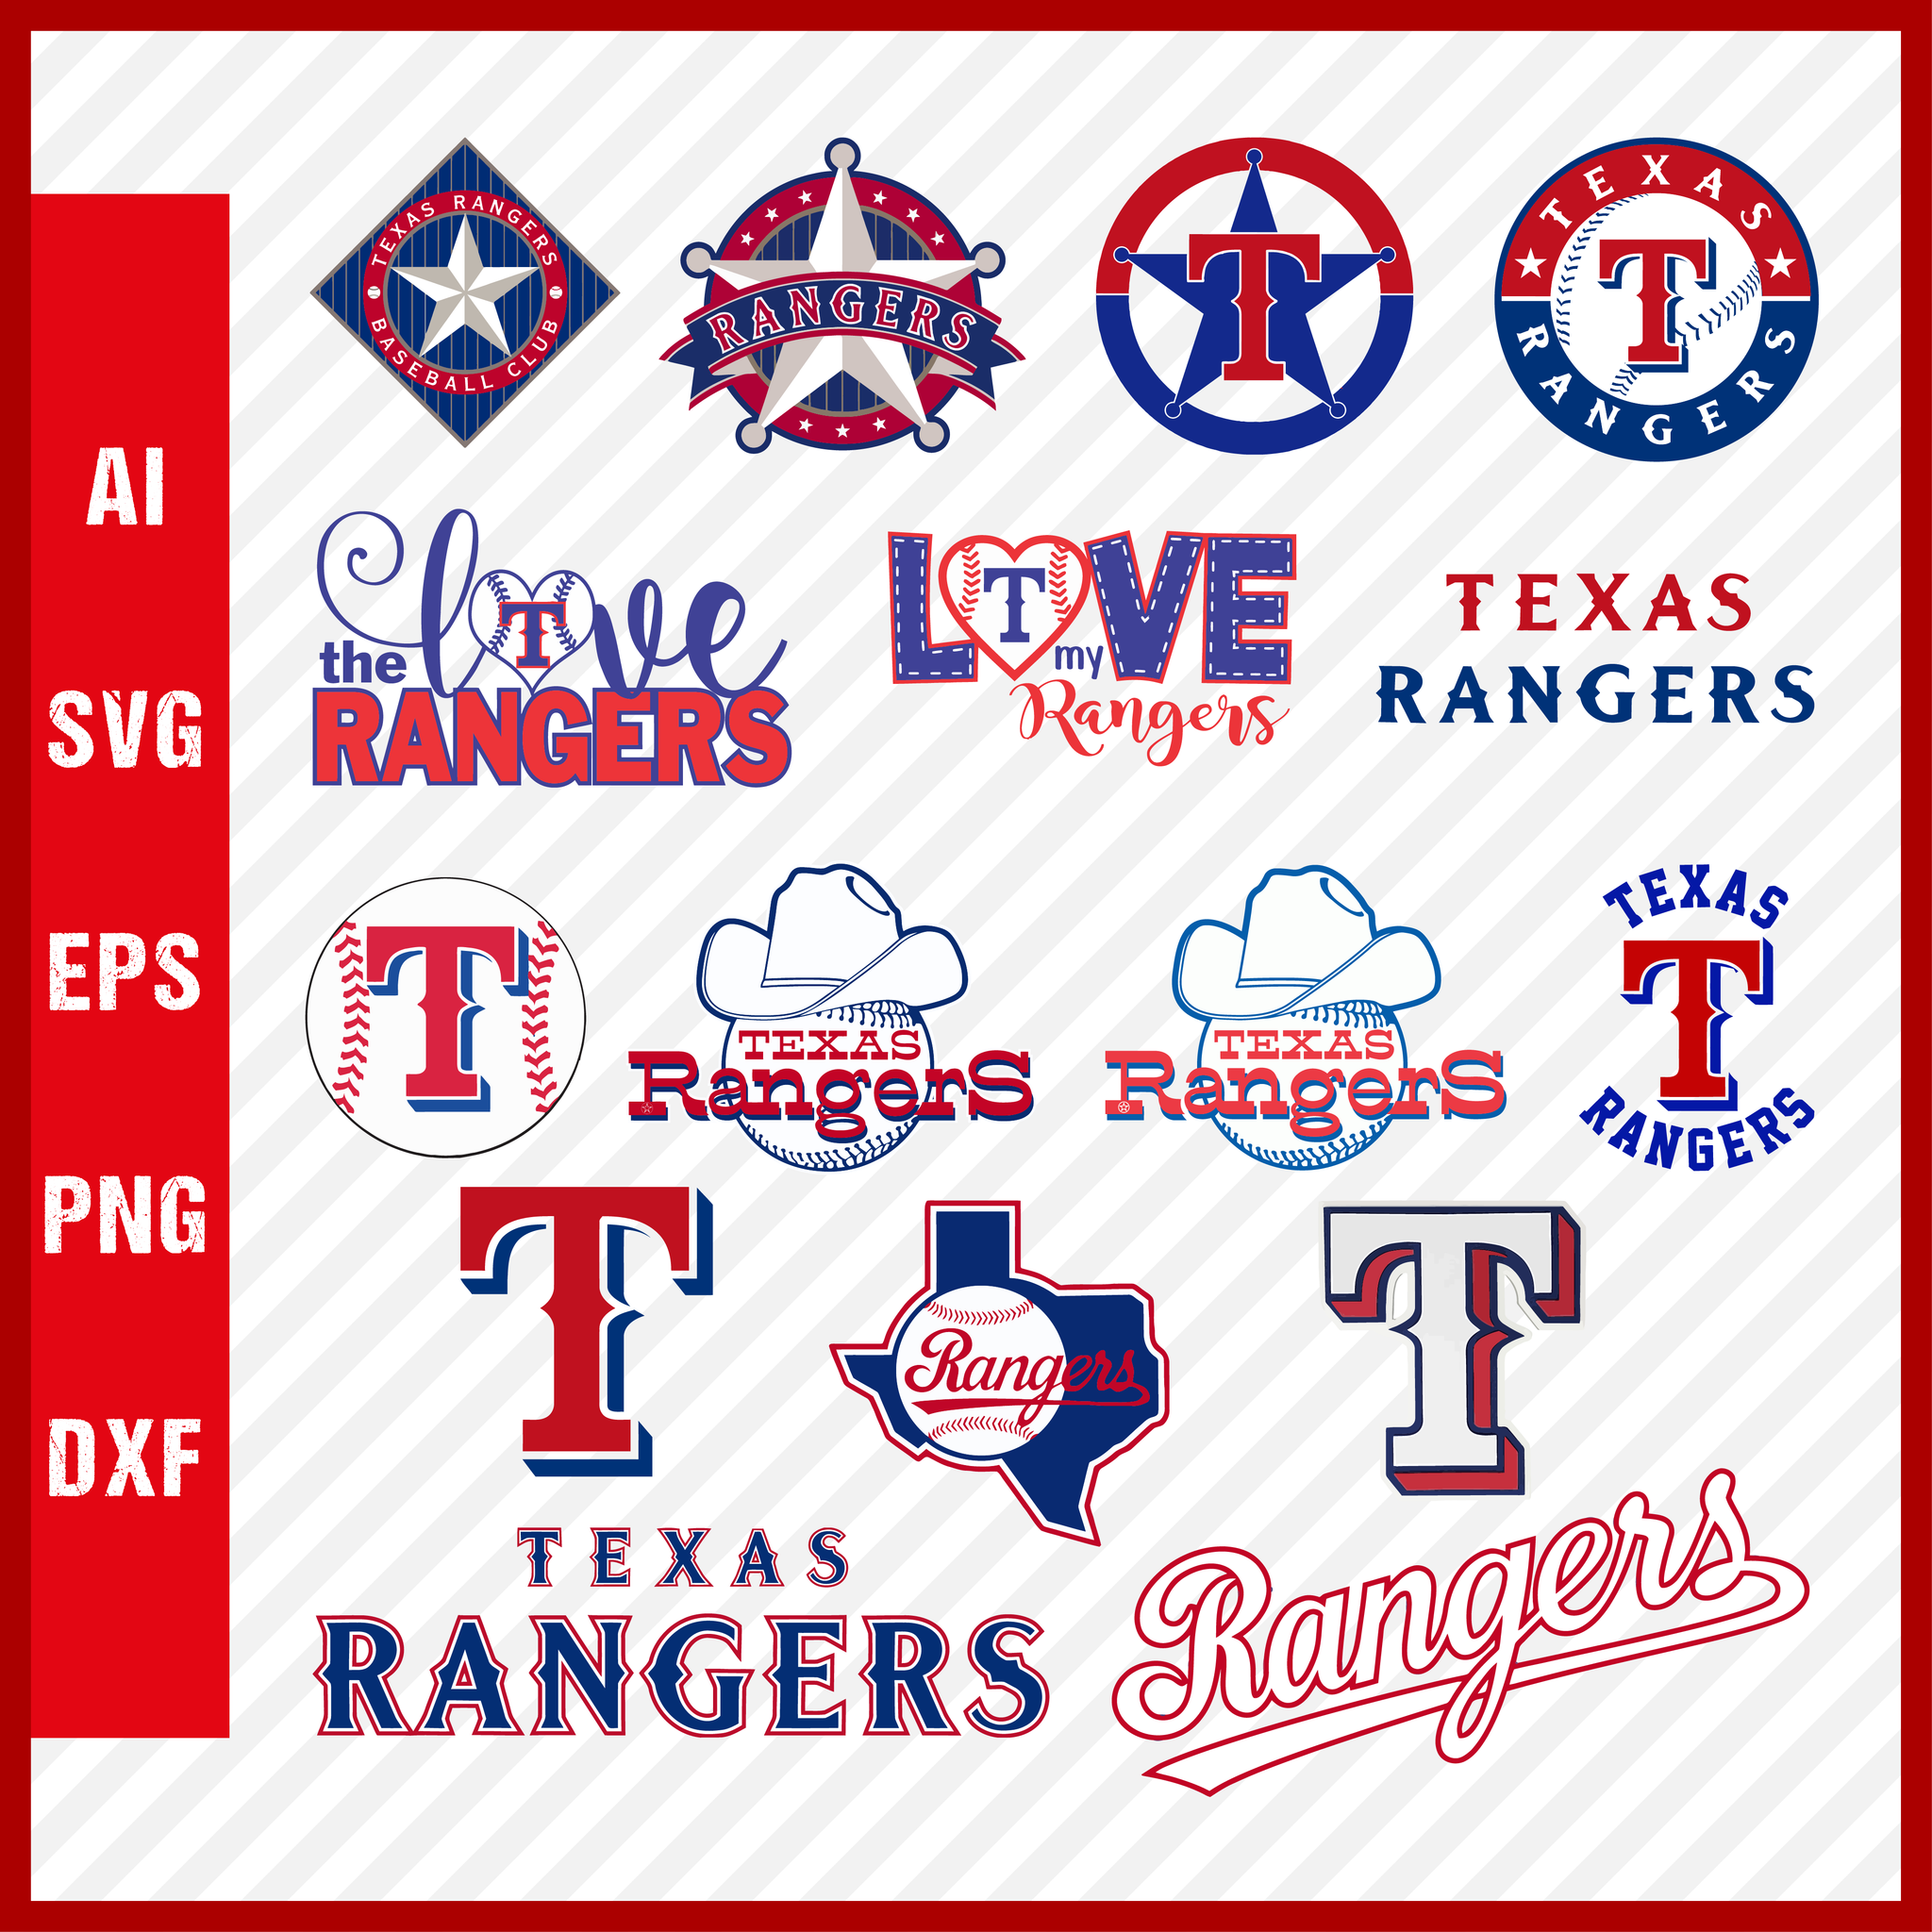 Pin by Texas Rangers on Your Texas Rangers  Texas rangers baseball, Rangers  baseball, Texas sports